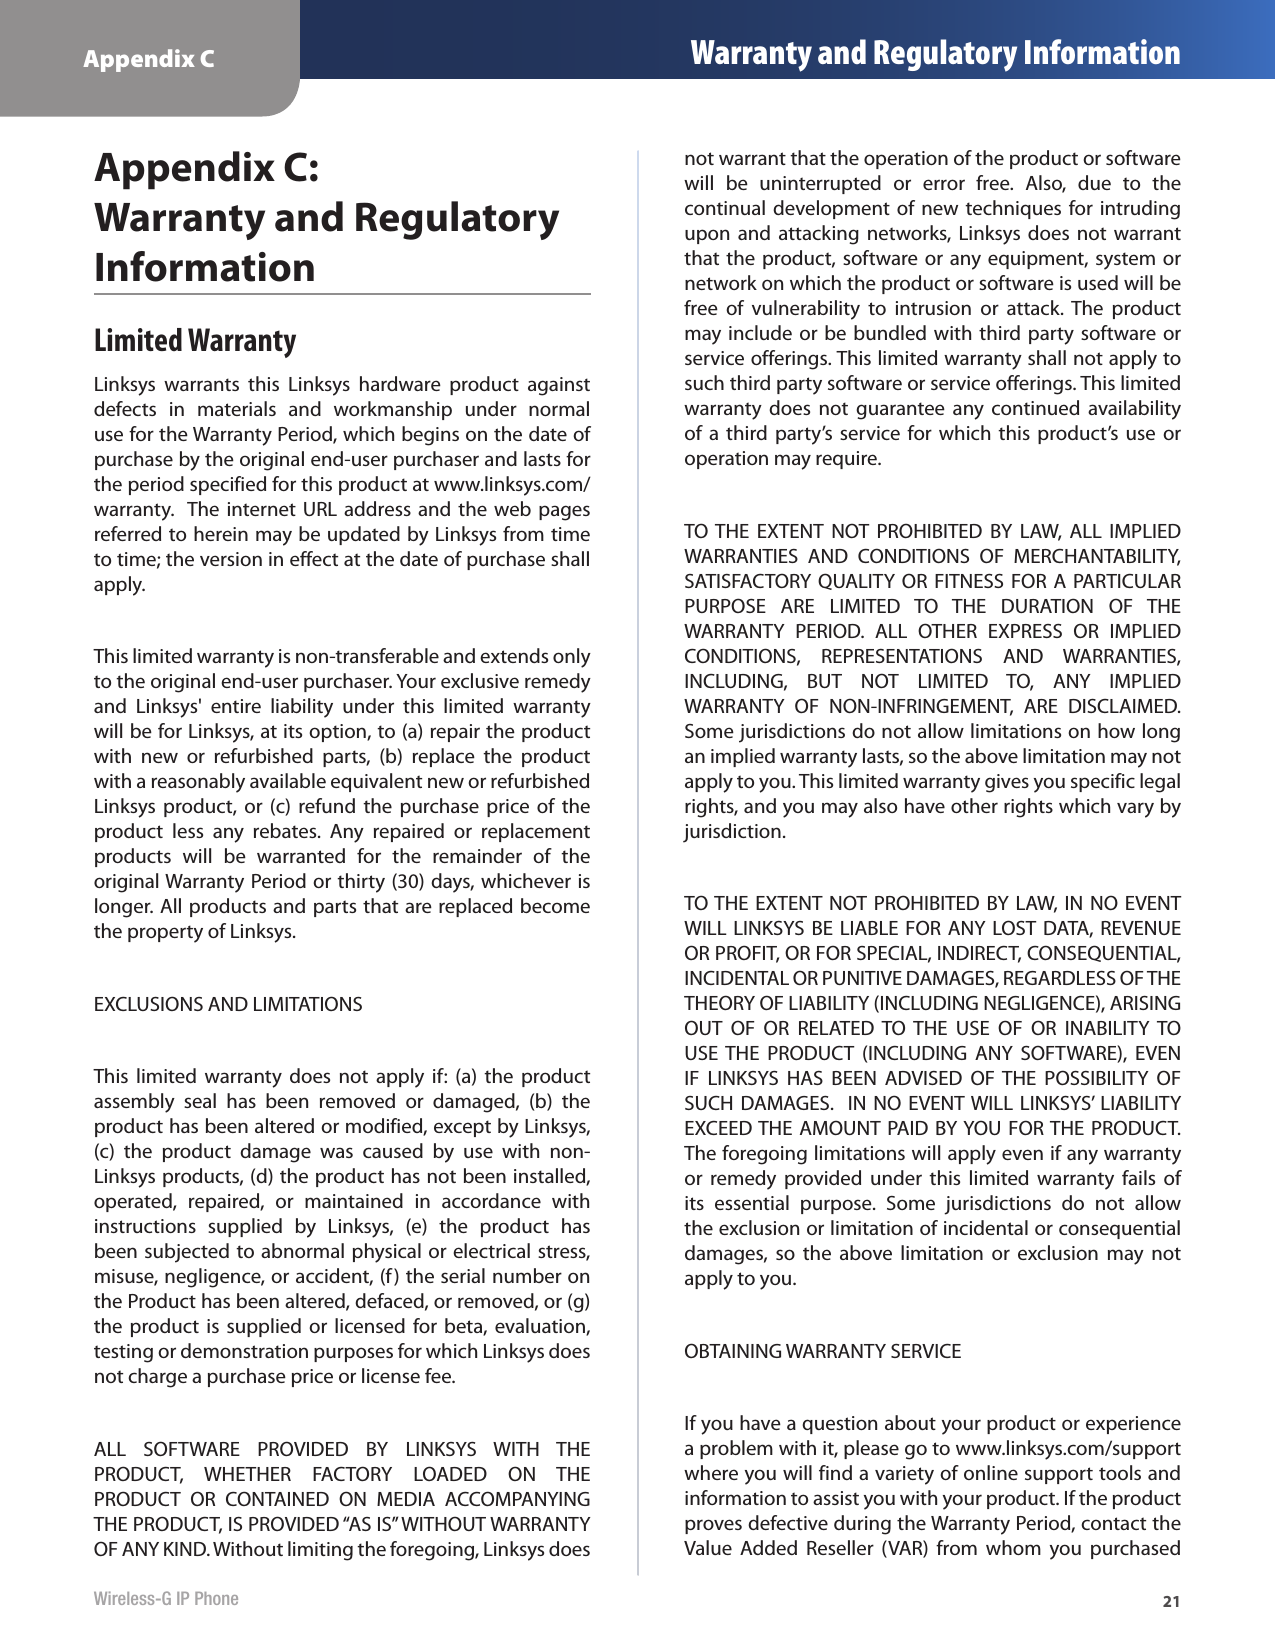 Appendix C Warranty and Regulatory Information21Wireless-G IP PhoneAppendix C:  Warranty and Regulatory InformationLimited WarrantyLinksys  warrants  this  Linksys  hardware  product  against defects  in  materials  and  workmanship  under  normal use for the Warranty Period, which begins on the date of purchase by the original end-user purchaser and lasts for the period specified for this product at www.linksys.com/warranty.  The internet  URL  address  and  the  web pages referred to herein may be updated by Linksys from time to time; the version in effect at the date of purchase shall apply.This limited warranty is non-transferable and extends only to the original end-user purchaser. Your exclusive remedy and  Linksys&apos;  entire  liability  under  this  limited  warranty will be for Linksys, at its option, to (a) repair the product with  new  or  refurbished  parts,  (b)  replace  the  product with a reasonably available equivalent new or refurbished Linksys product,  or  (c)  refund  the  purchase  price  of  the product  less  any  rebates.  Any  repaired  or  replacement products  will  be  warranted  for  the  remainder  of  the original Warranty Period or thirty (30) days, whichever is longer. All products and parts that are replaced become the property of Linksys.EXCLUSIONS AND LIMITATIONS  This  limited  warranty  does  not  apply  if:  (a)  the  product assembly  seal  has  been  removed  or  damaged,  (b)  the product has been altered or modified, except by Linksys, (c)  the  product  damage  was  caused  by  use  with  non-Linksys products, (d) the product has not been installed, operated,  repaired,  or  maintained  in  accordance  with instructions  supplied  by  Linksys,  (e)  the  product  has been subjected to abnormal physical or electrical stress, misuse, negligence, or accident, (f) the serial number on the Product has been altered, defaced, or removed, or (g) the product  is supplied  or  licensed for beta,  evaluation, testing or demonstration purposes for which Linksys does not charge a purchase price or license fee.ALL  SOFTWARE  PROVIDED  BY  LINKSYS  WITH  THE PRODUCT,  WHETHER  FACTORY  LOADED  ON  THE PRODUCT  OR  CONTAINED  ON  MEDIA  ACCOMPANYING THE PRODUCT, IS PROVIDED “AS IS” WITHOUT WARRANTY OF ANY KIND. Without limiting the foregoing, Linksys does not warrant that the operation of the product or software will  be  uninterrupted  or  error  free.  Also,  due  to  the continual development of new  techniques for intruding upon and  attacking  networks, Linksys does  not warrant that the product, software or any equipment, system or network on which the product or software is used will be free  of  vulnerability  to  intrusion  or  attack.  The  product may include or be bundled with third party  software or service offerings. This limited warranty shall not apply to such third party software or service offerings. This limited warranty  does  not  guarantee  any  continued  availability of a  third party’s  service for which  this  product’s  use or operation may require.   TO THE  EXTENT  NOT  PROHIBITED  BY  LAW,  ALL  IMPLIED WARRANTIES  AND  CONDITIONS  OF  MERCHANTABILITY, SATISFACTORY QUALITY OR FITNESS FOR A PARTICULAR PURPOSE  ARE  LIMITED  TO  THE  DURATION  OF  THE WARRANTY  PERIOD.  ALL  OTHER  EXPRESS  OR  IMPLIED CONDITIONS,  REPRESENTATIONS  AND  WARRANTIES, INCLUDING,  BUT  NOT  LIMITED  TO,  ANY  IMPLIED WARRANTY  OF  NON-INFRINGEMENT,  ARE  DISCLAIMED. Some jurisdictions do not allow limitations on how long an implied warranty lasts, so the above limitation may not apply to you. This limited warranty gives you specific legal rights, and you may also have other rights which vary by jurisdiction.TO THE EXTENT NOT PROHIBITED BY LAW, IN NO EVENT WILL LINKSYS BE LIABLE FOR ANY LOST  DATA, REVENUE OR PROFIT, OR FOR SPECIAL, INDIRECT, CONSEQUENTIAL, INCIDENTAL OR PUNITIVE DAMAGES, REGARDLESS OF THE THEORY OF LIABILITY (INCLUDING NEGLIGENCE), ARISING OUT  OF  OR  RELATED  TO  THE  USE  OF  OR  INABILITY  TO USE THE  PRODUCT  (INCLUDING  ANY  SOFTWARE),  EVEN IF  LINKSYS  HAS  BEEN  ADVISED  OF  THE  POSSIBILITY  OF SUCH DAMAGES.  IN NO EVENT WILL  LINKSYS’ LIABILITY EXCEED THE AMOUNT PAID BY YOU FOR THE PRODUCT. The foregoing limitations will apply even if any warranty or  remedy  provided under  this  limited  warranty  fails  of its  essential  purpose.  Some  jurisdictions  do  not  allow the exclusion or limitation of incidental or consequential damages,  so  the  above  limitation  or  exclusion  may  not apply to you.OBTAINING WARRANTY SERVICEIf you have a question about your product or experience a problem with it, please go to www.linksys.com/support where you will find a variety of online support tools and information to assist you with your product. If the product proves defective during the Warranty Period, contact the Value  Added  Reseller  (VAR)  from  whom  you  purchased 